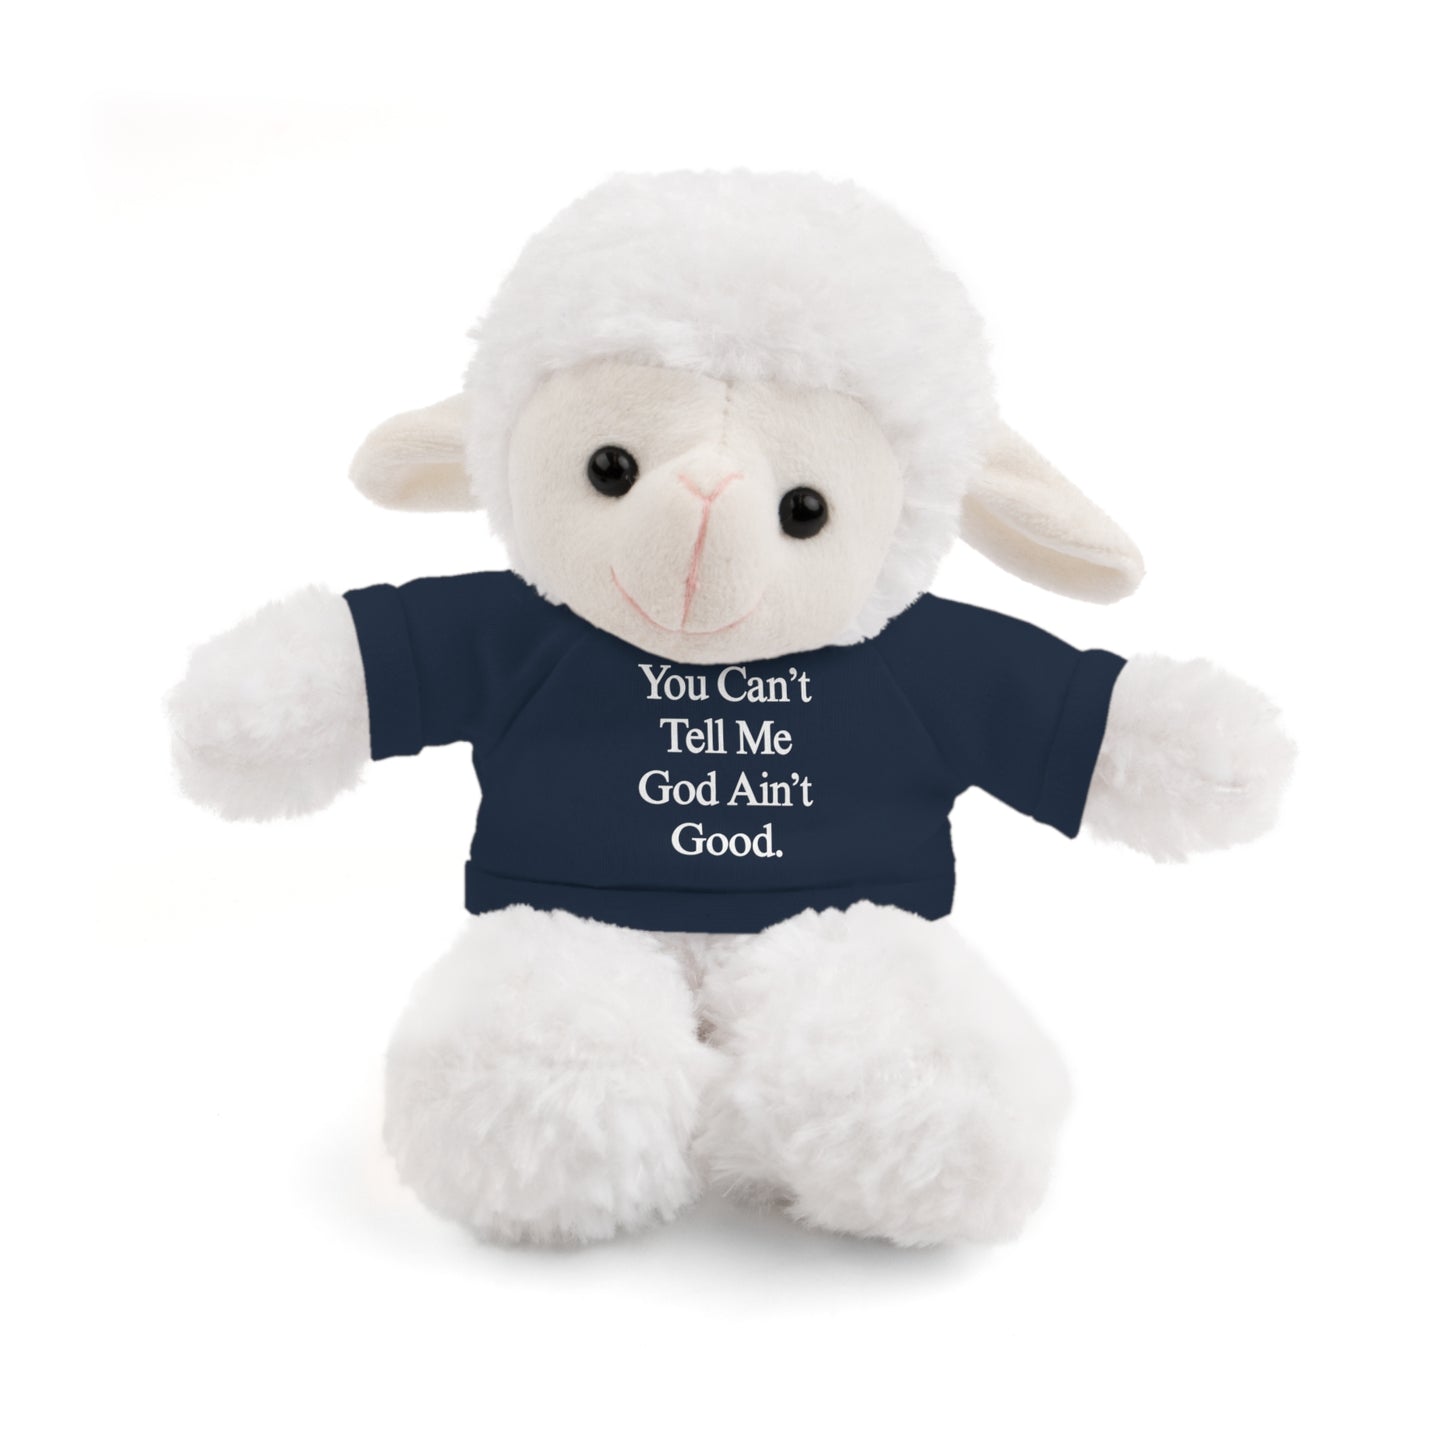 Stuffed Animals With "You Can't Tell Me" T-Shirt